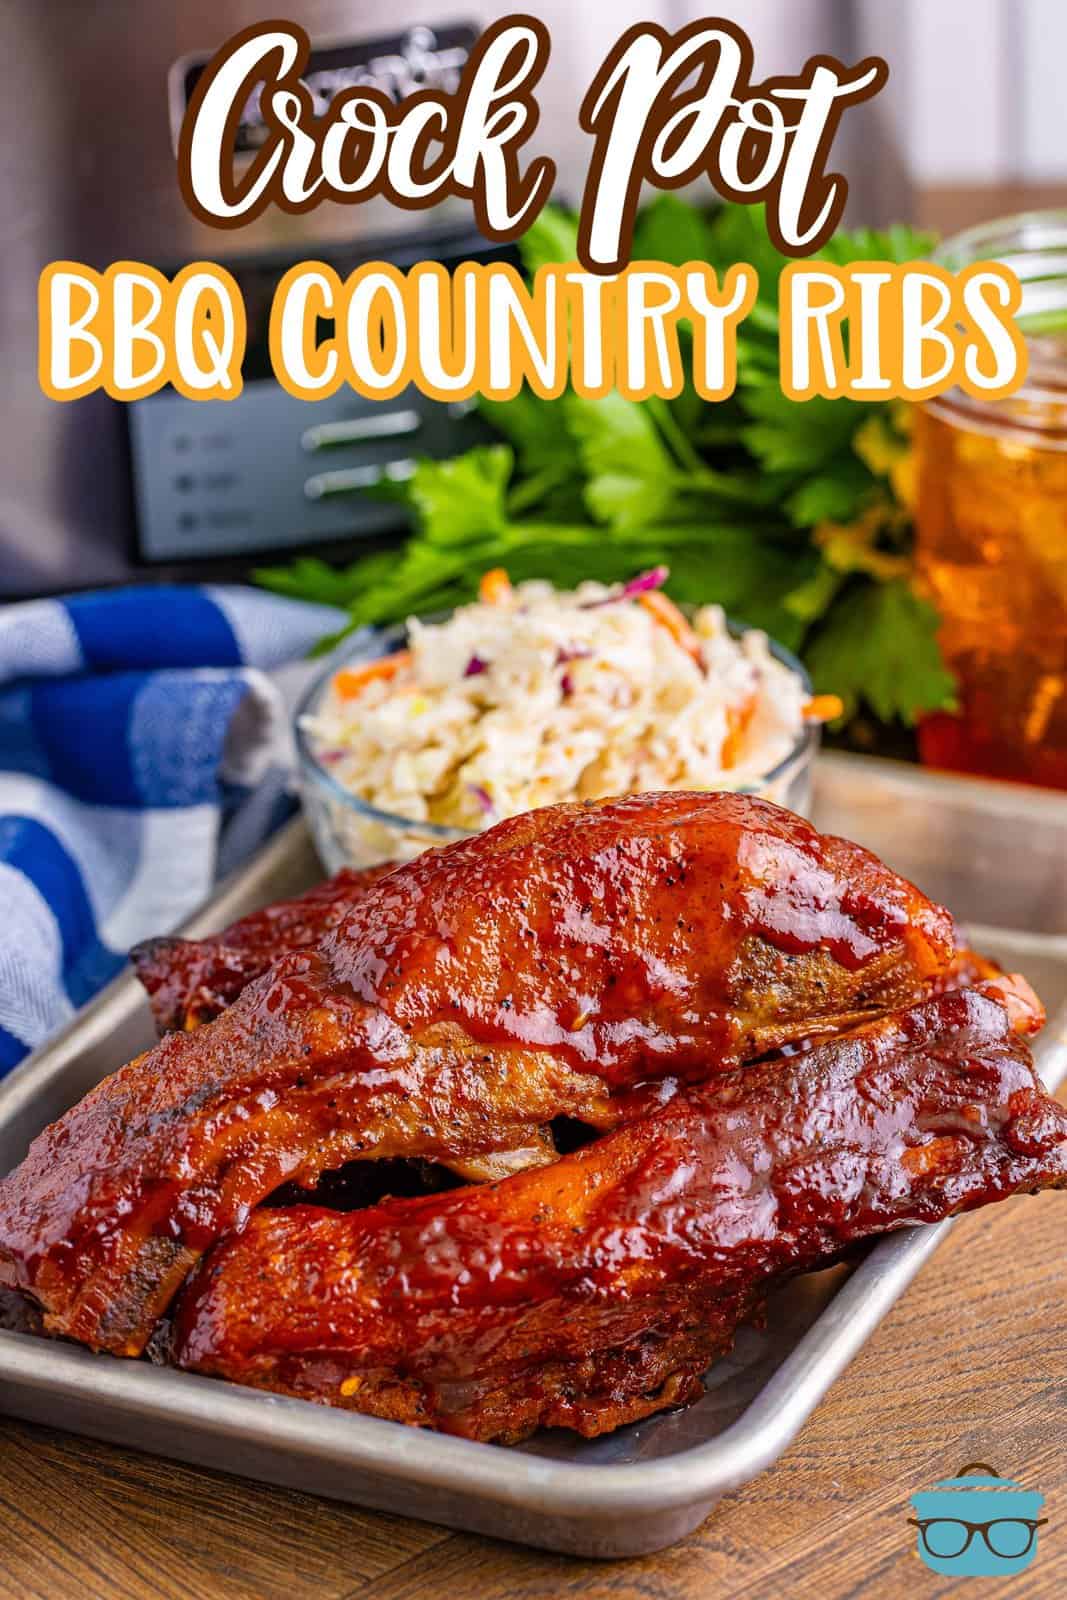 A serving plate with BBQ Country Style Ribs made in the Crock Pot.